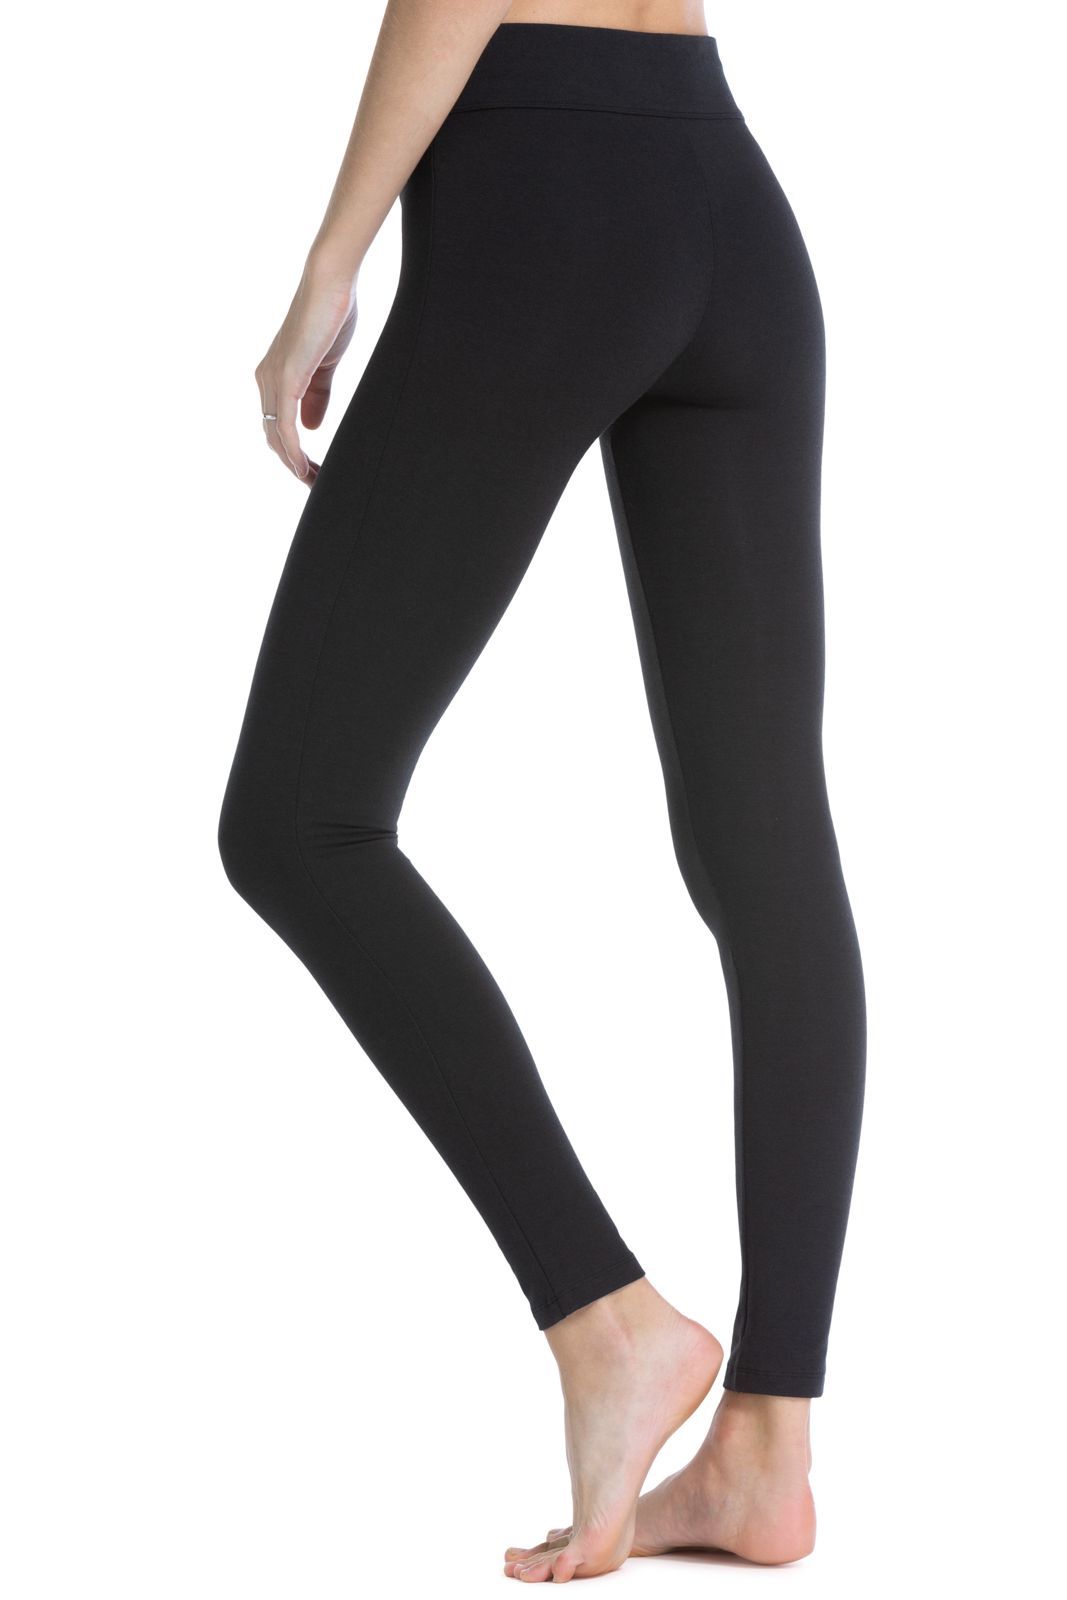 Buy BTC Womens Ankle Length Strechable Spandex Lycra Leggings| Pants  (Black, Free Size) for Regular wear and Gym. Be Trendy! at